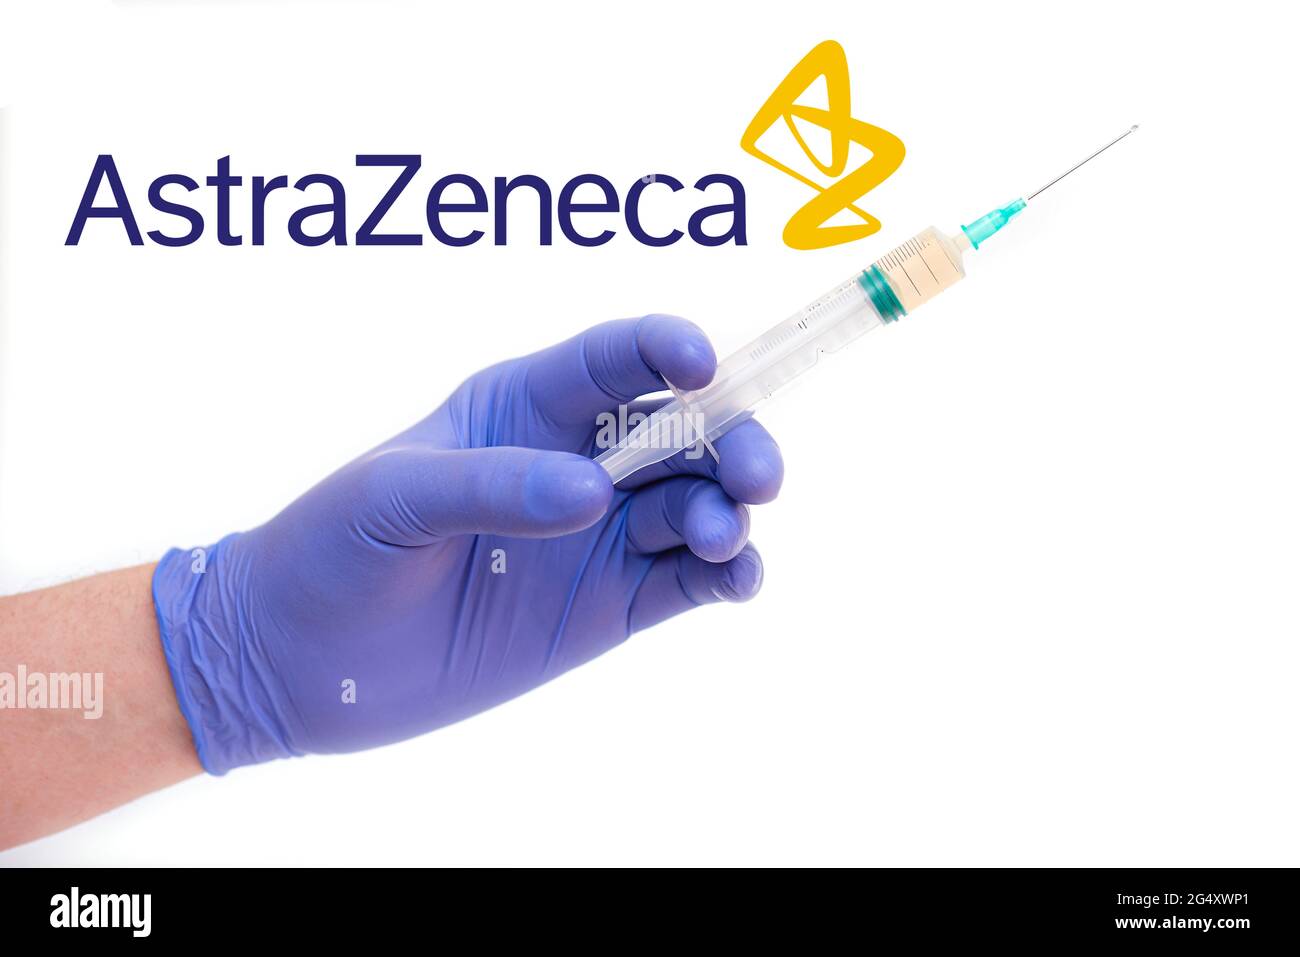 BERLIN - JUNE 23: AstraZeneca logotype and a doctor holding syringe with needle, vaccine isolated on white in Berlin, June 23, 2021 in Germany Stock Photo